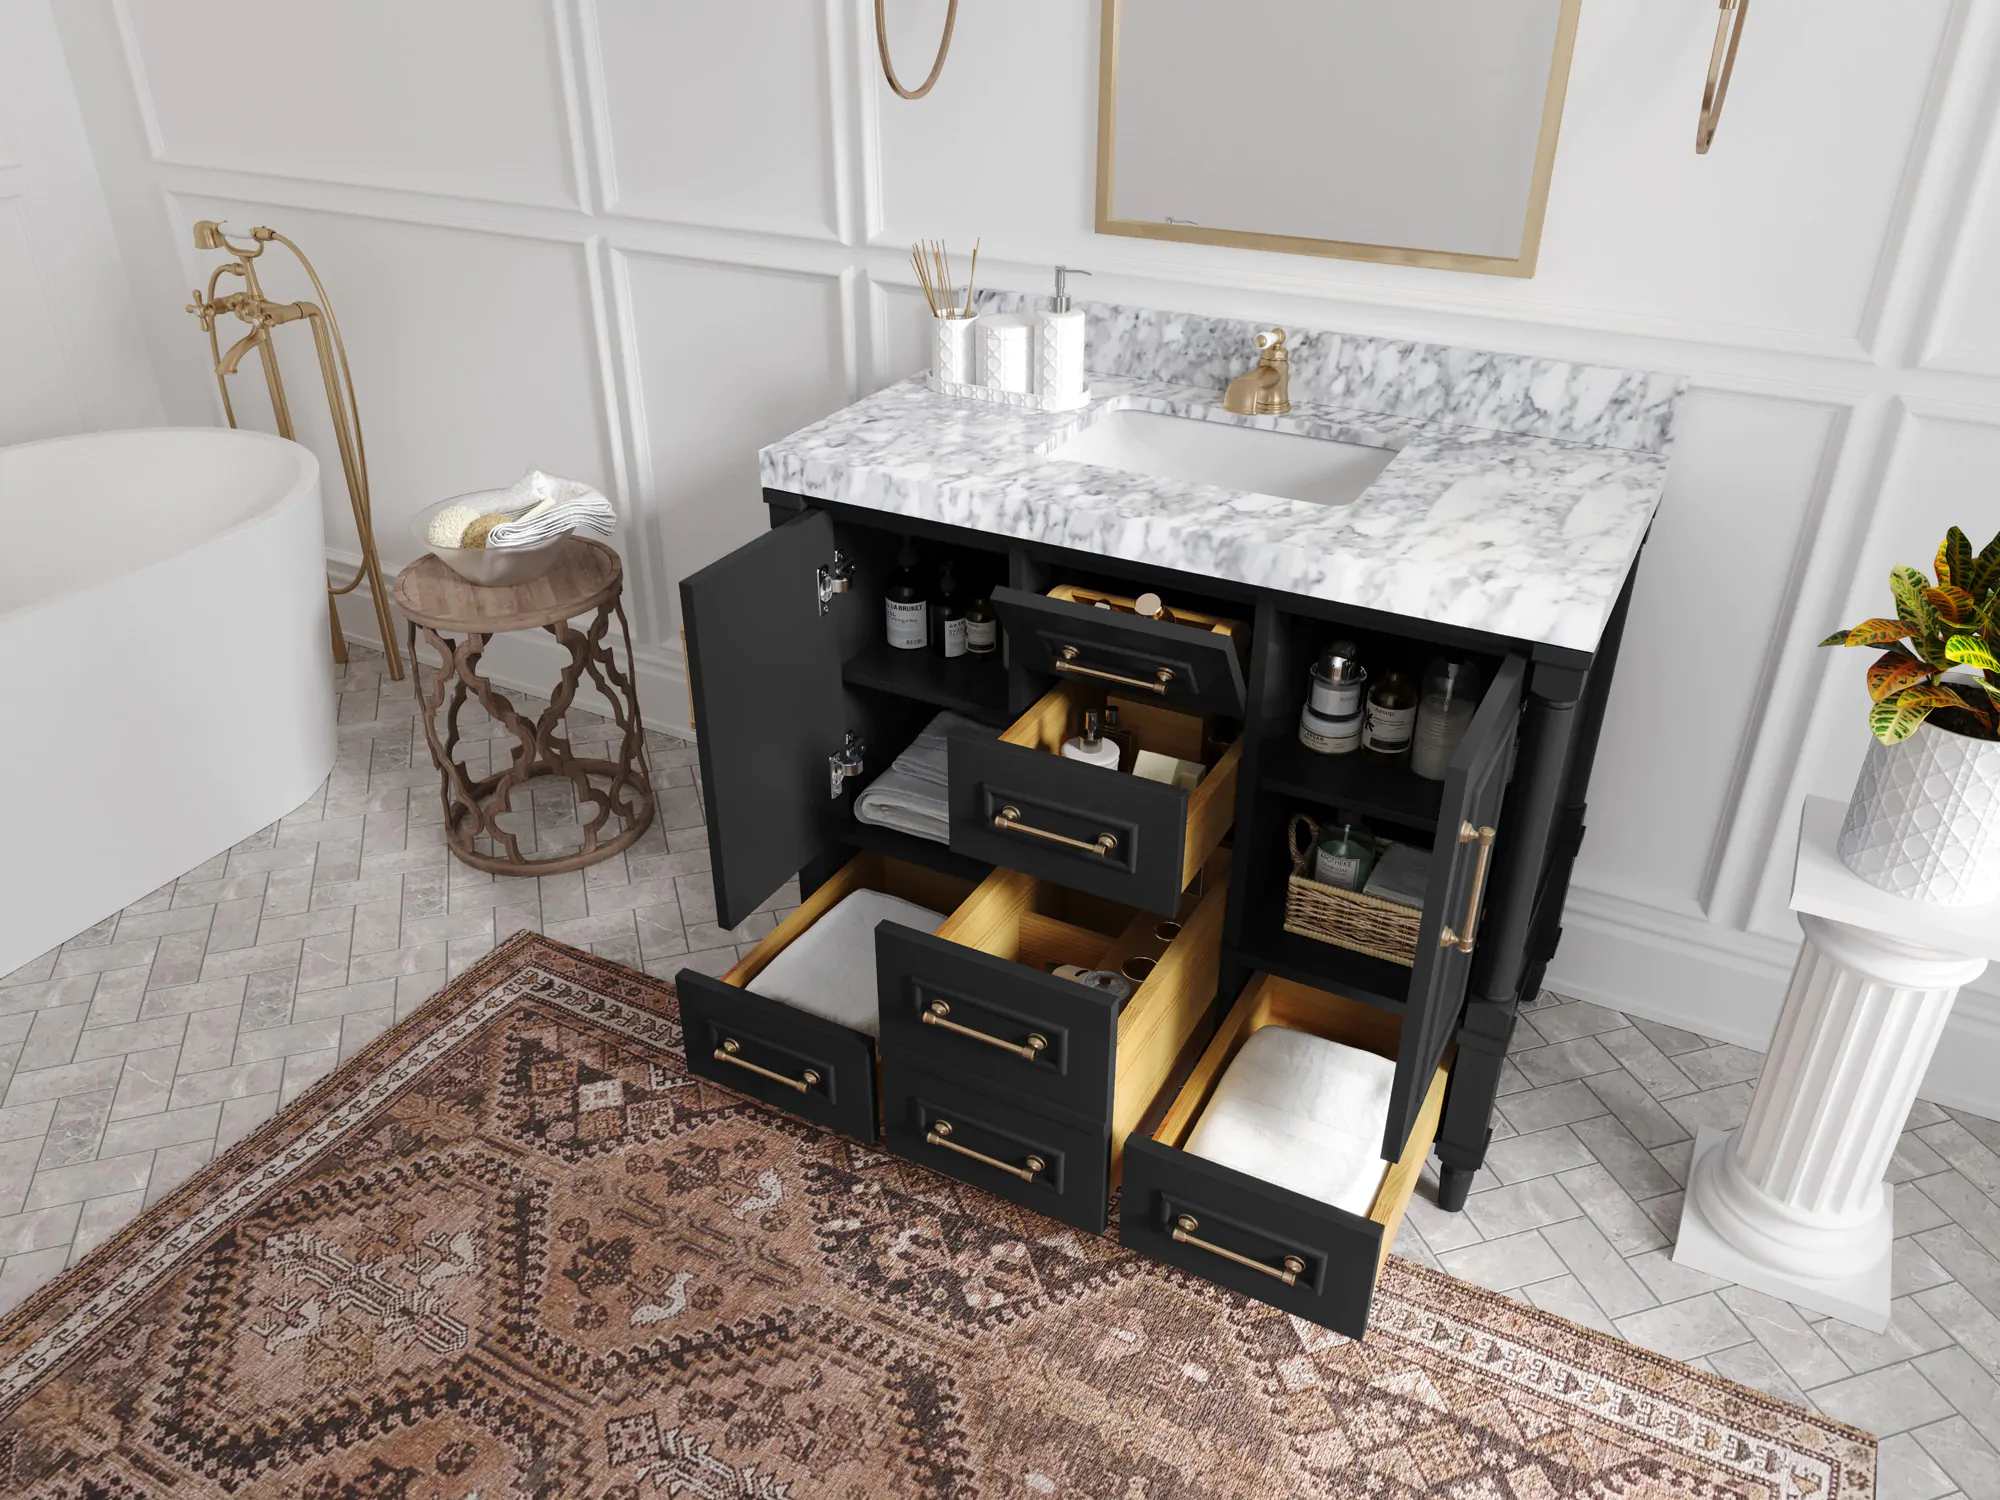 Bathroom Vanities: Everything You Wanted to Know But Were Afraid to Ask